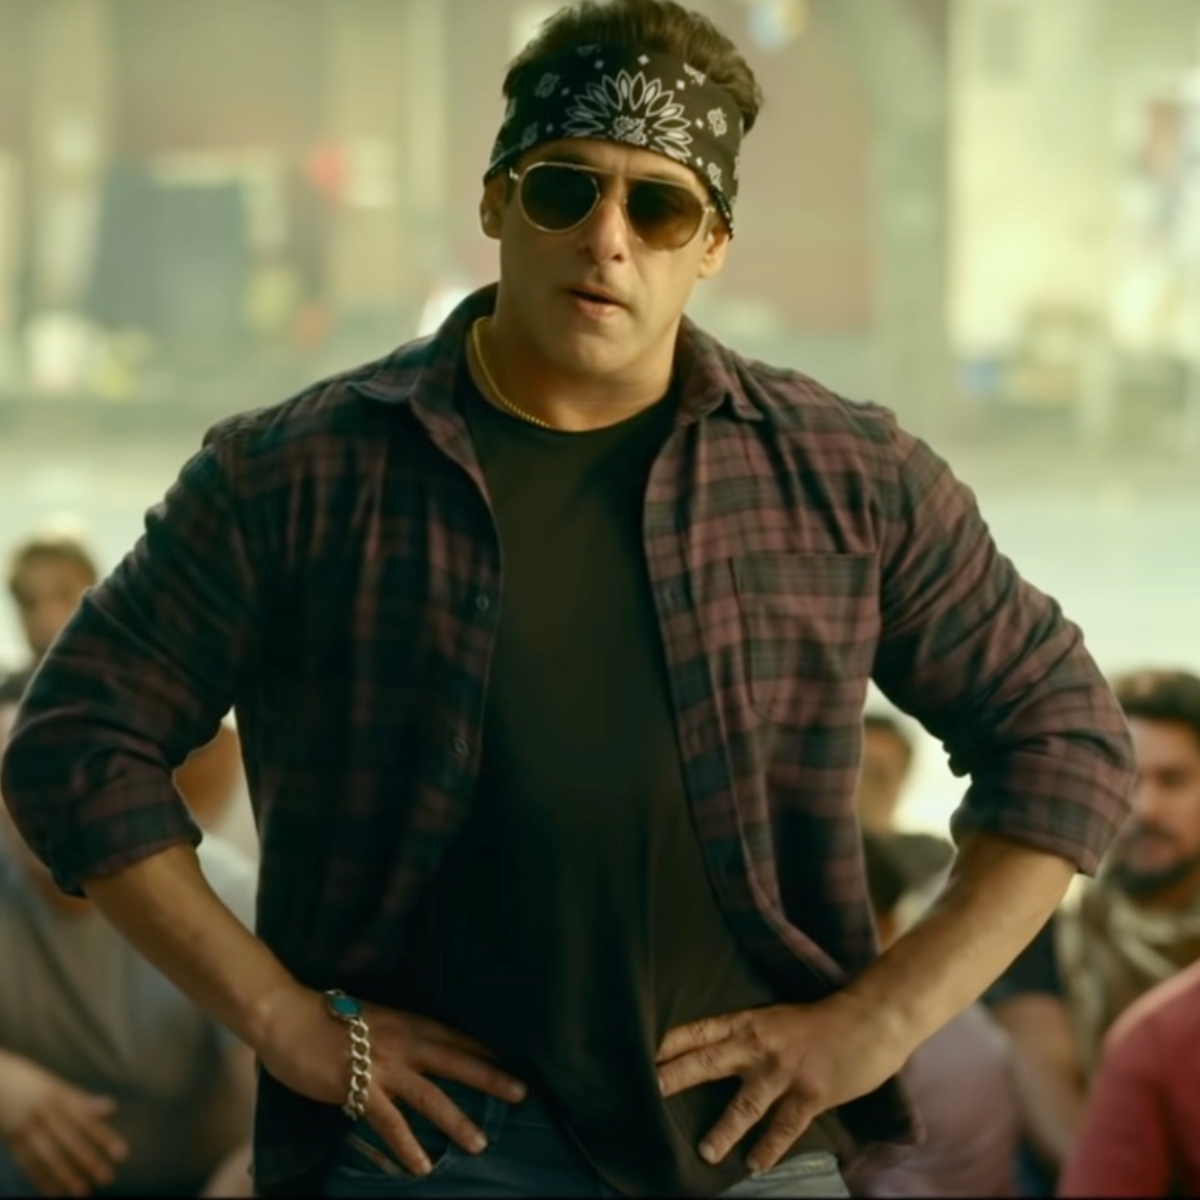 EXCLUSIVE: Salman Khan's Radhe misses out on Hyderabad theatrical release too; Trade analysts weigh the losses